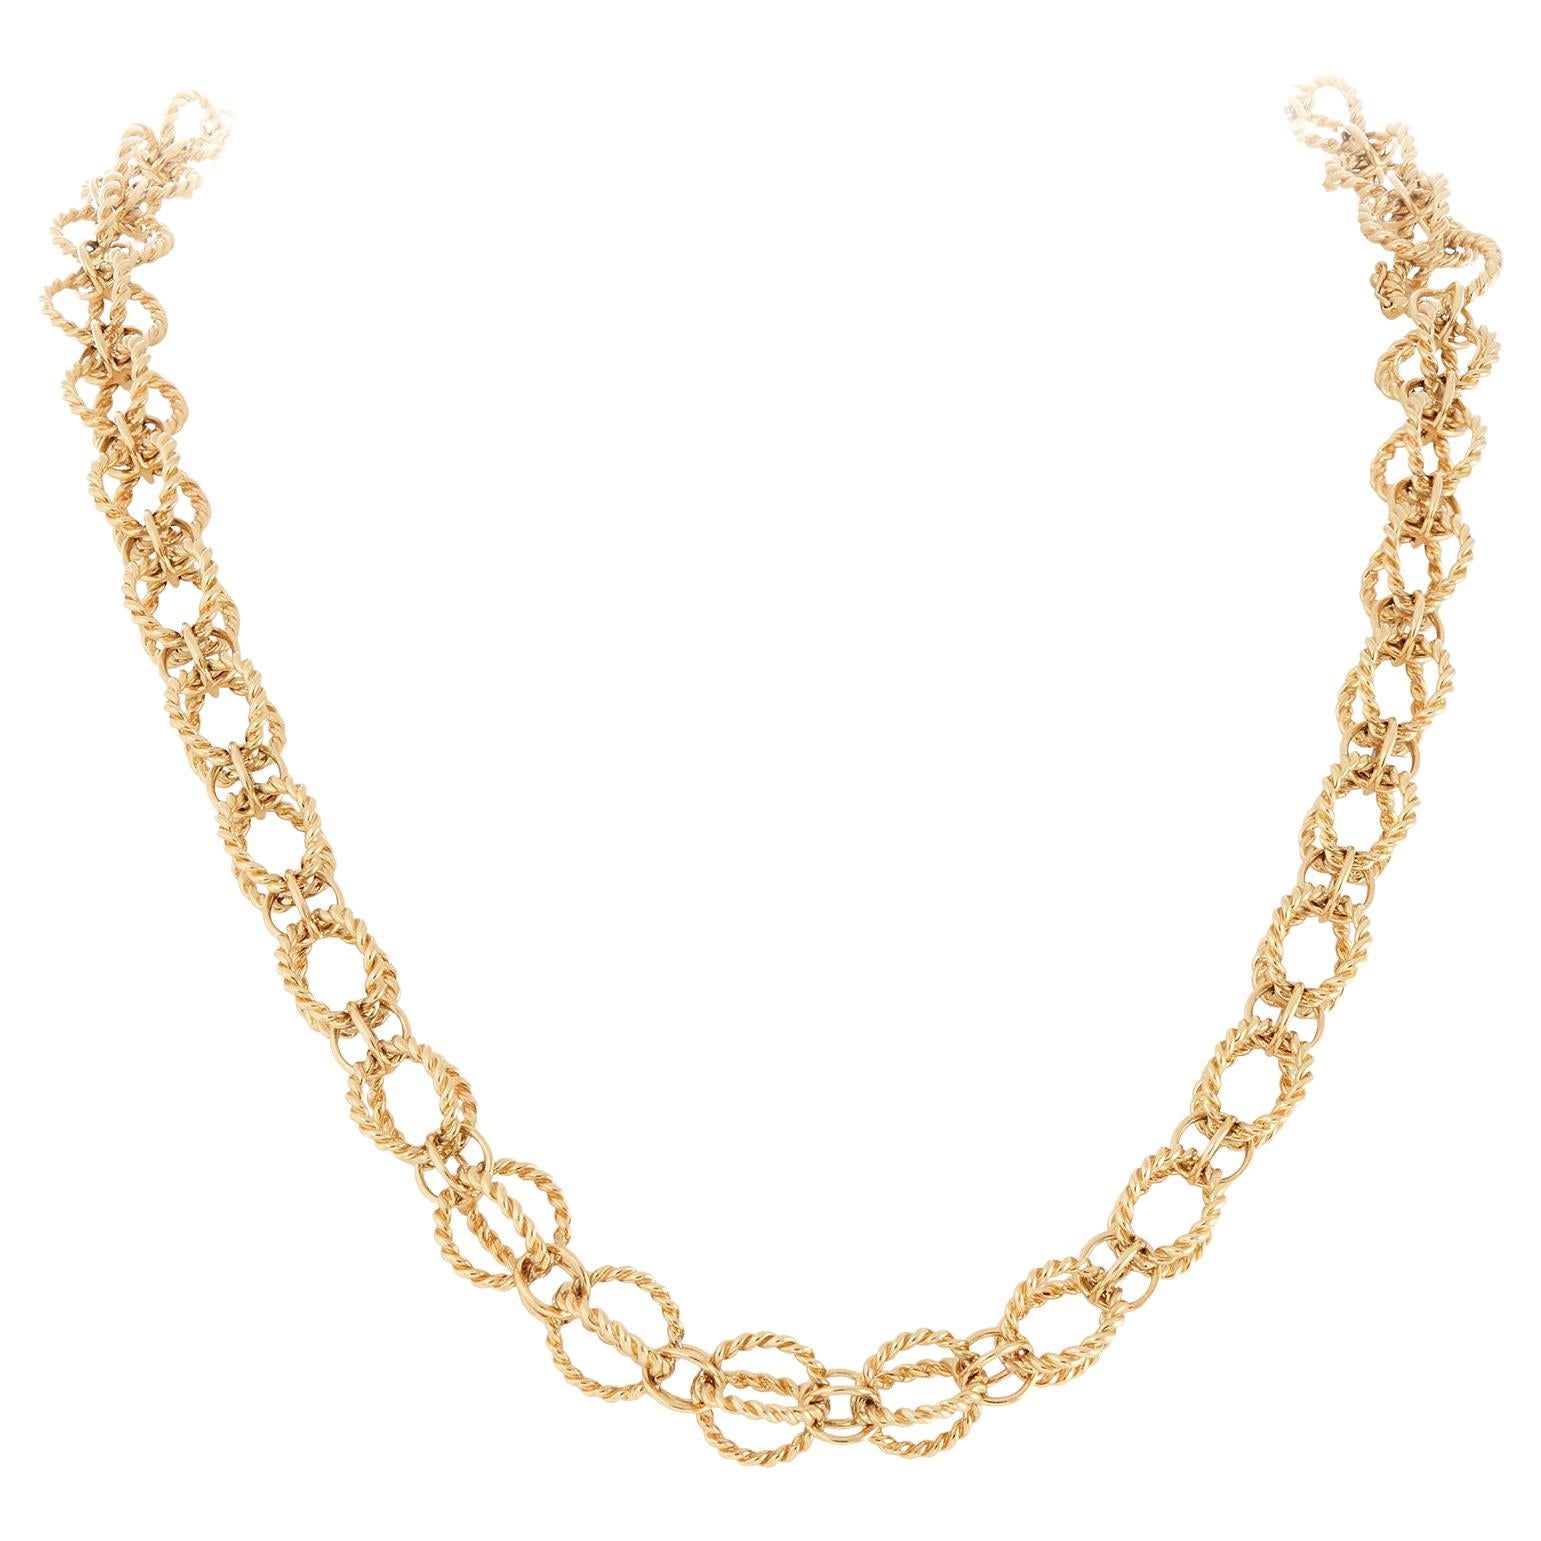 Jean Schlumberger for Tiffany & Co. 'Circle Rope' Necklace